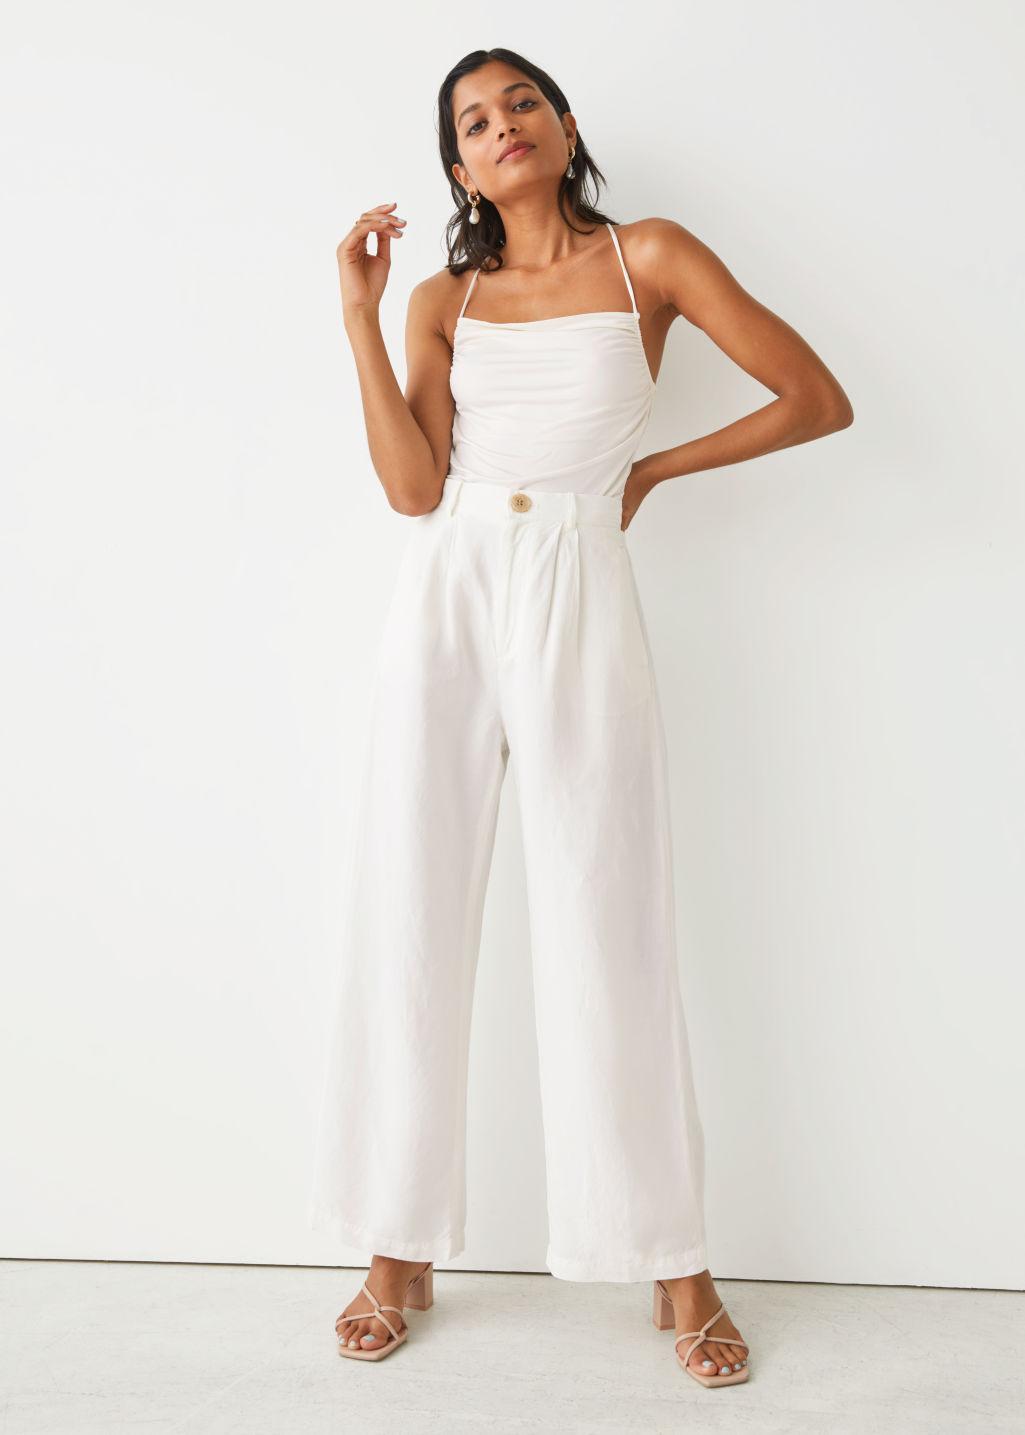 & Other Stories Wide High Waist Linen Trousers in White | Lyst